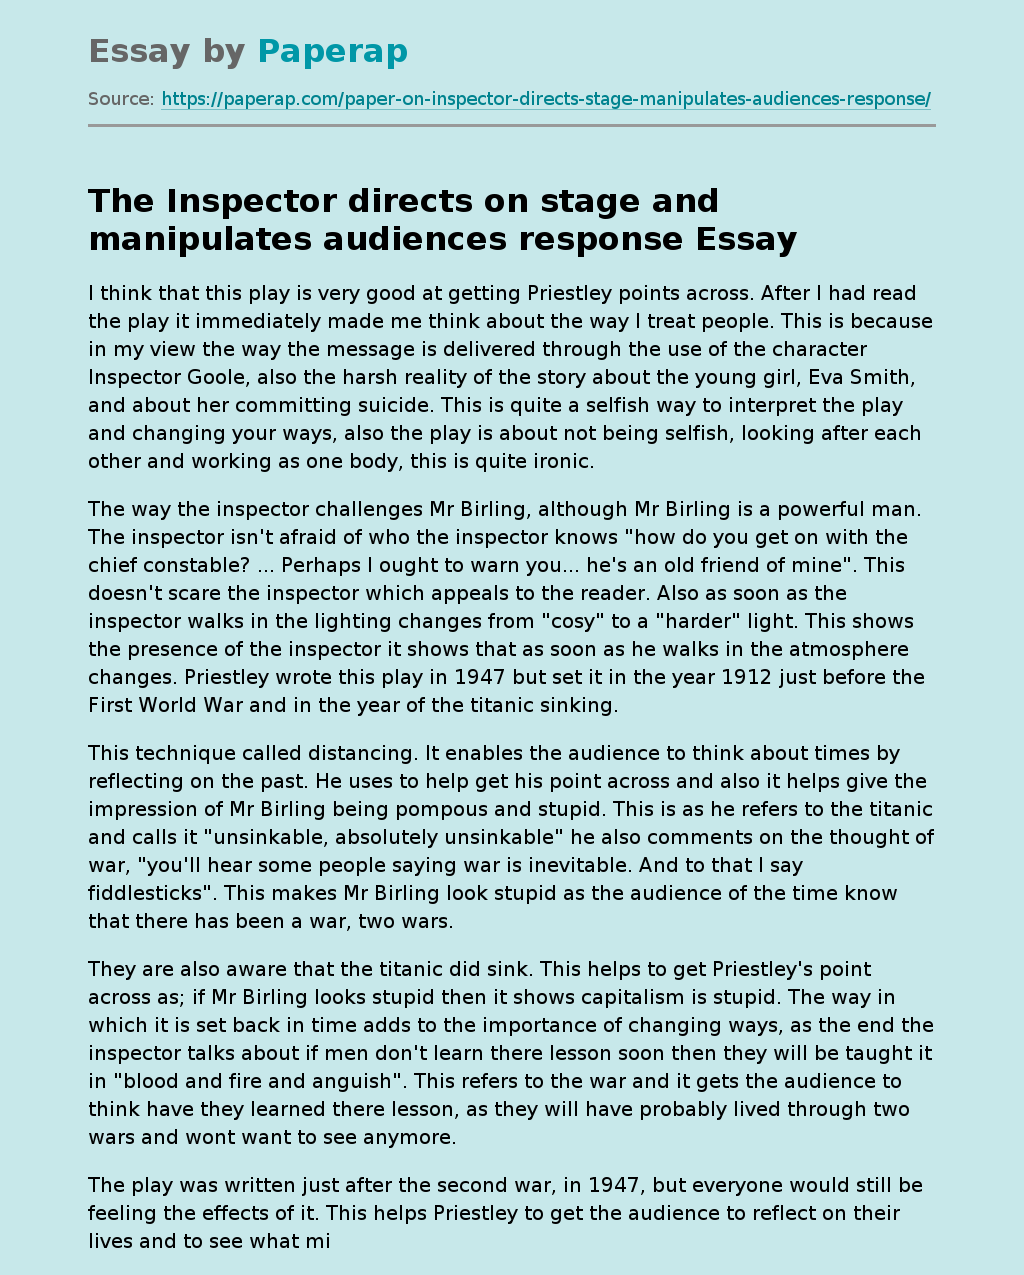 The Inspector Directs on Stage and Manipulates Audiences Response